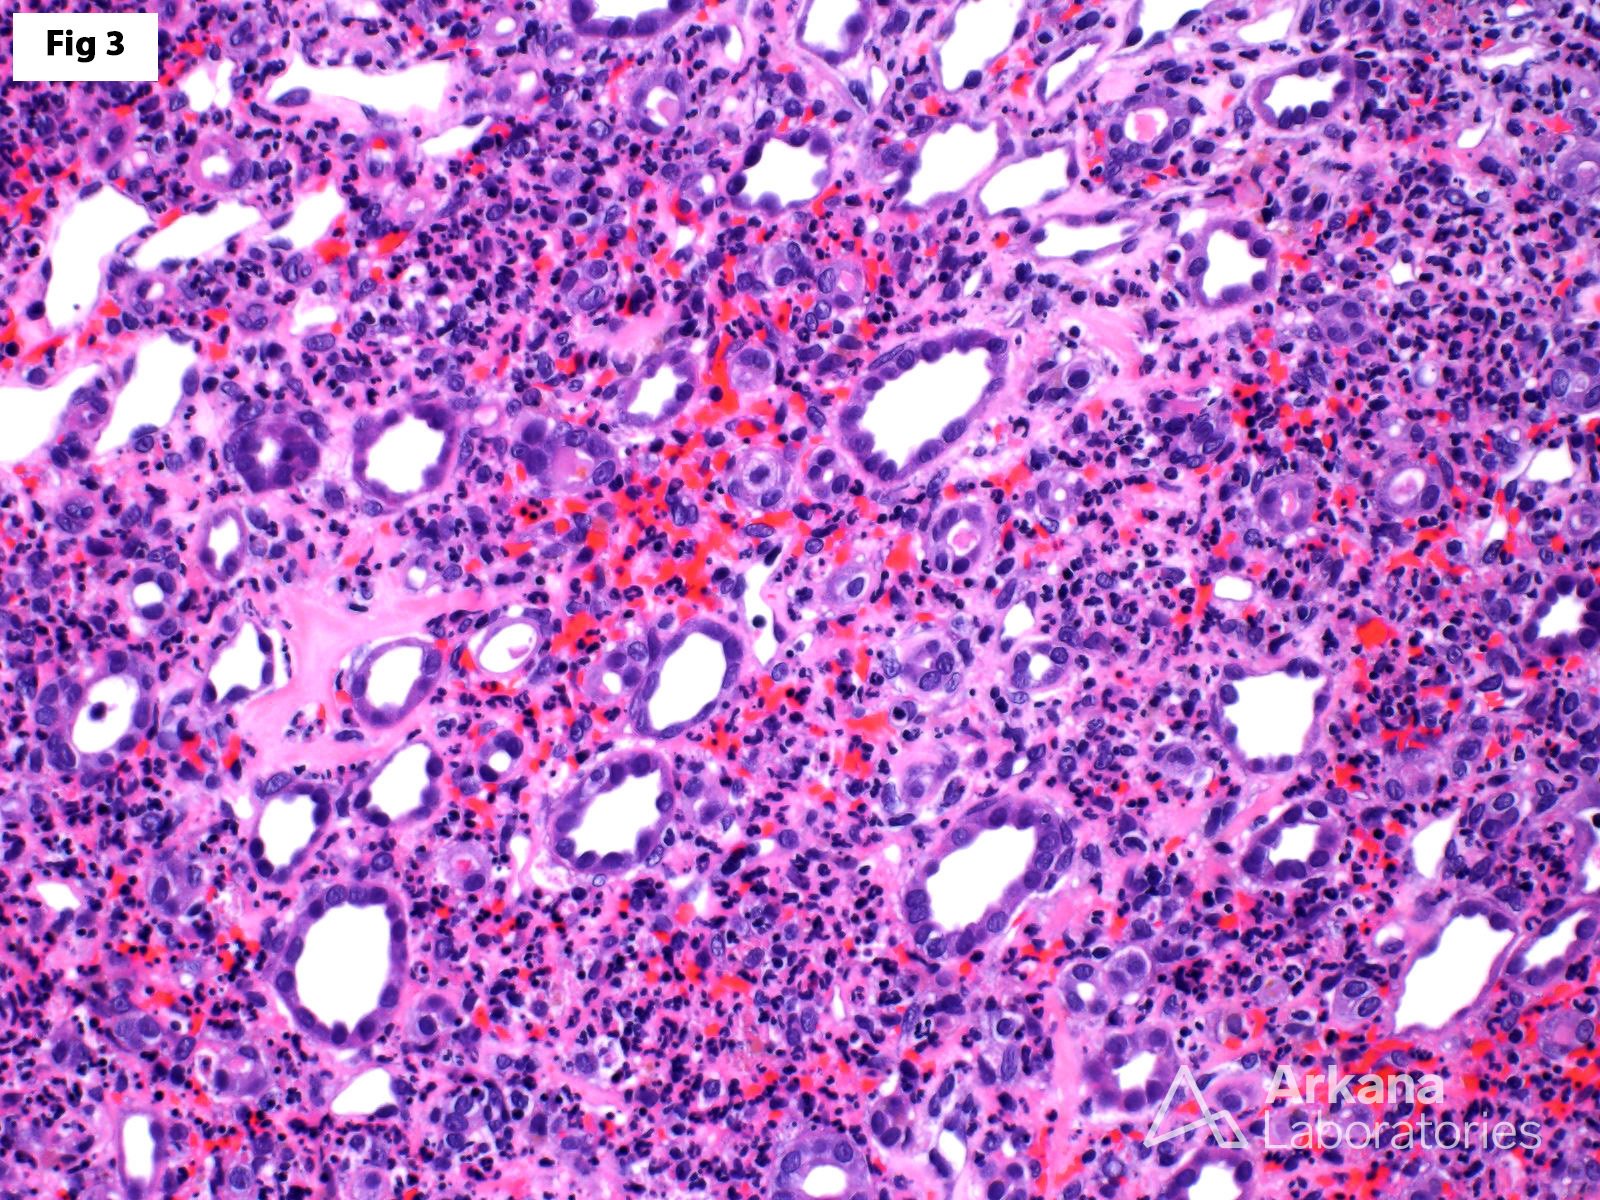 significant neutrophil-rich medullary angiitis